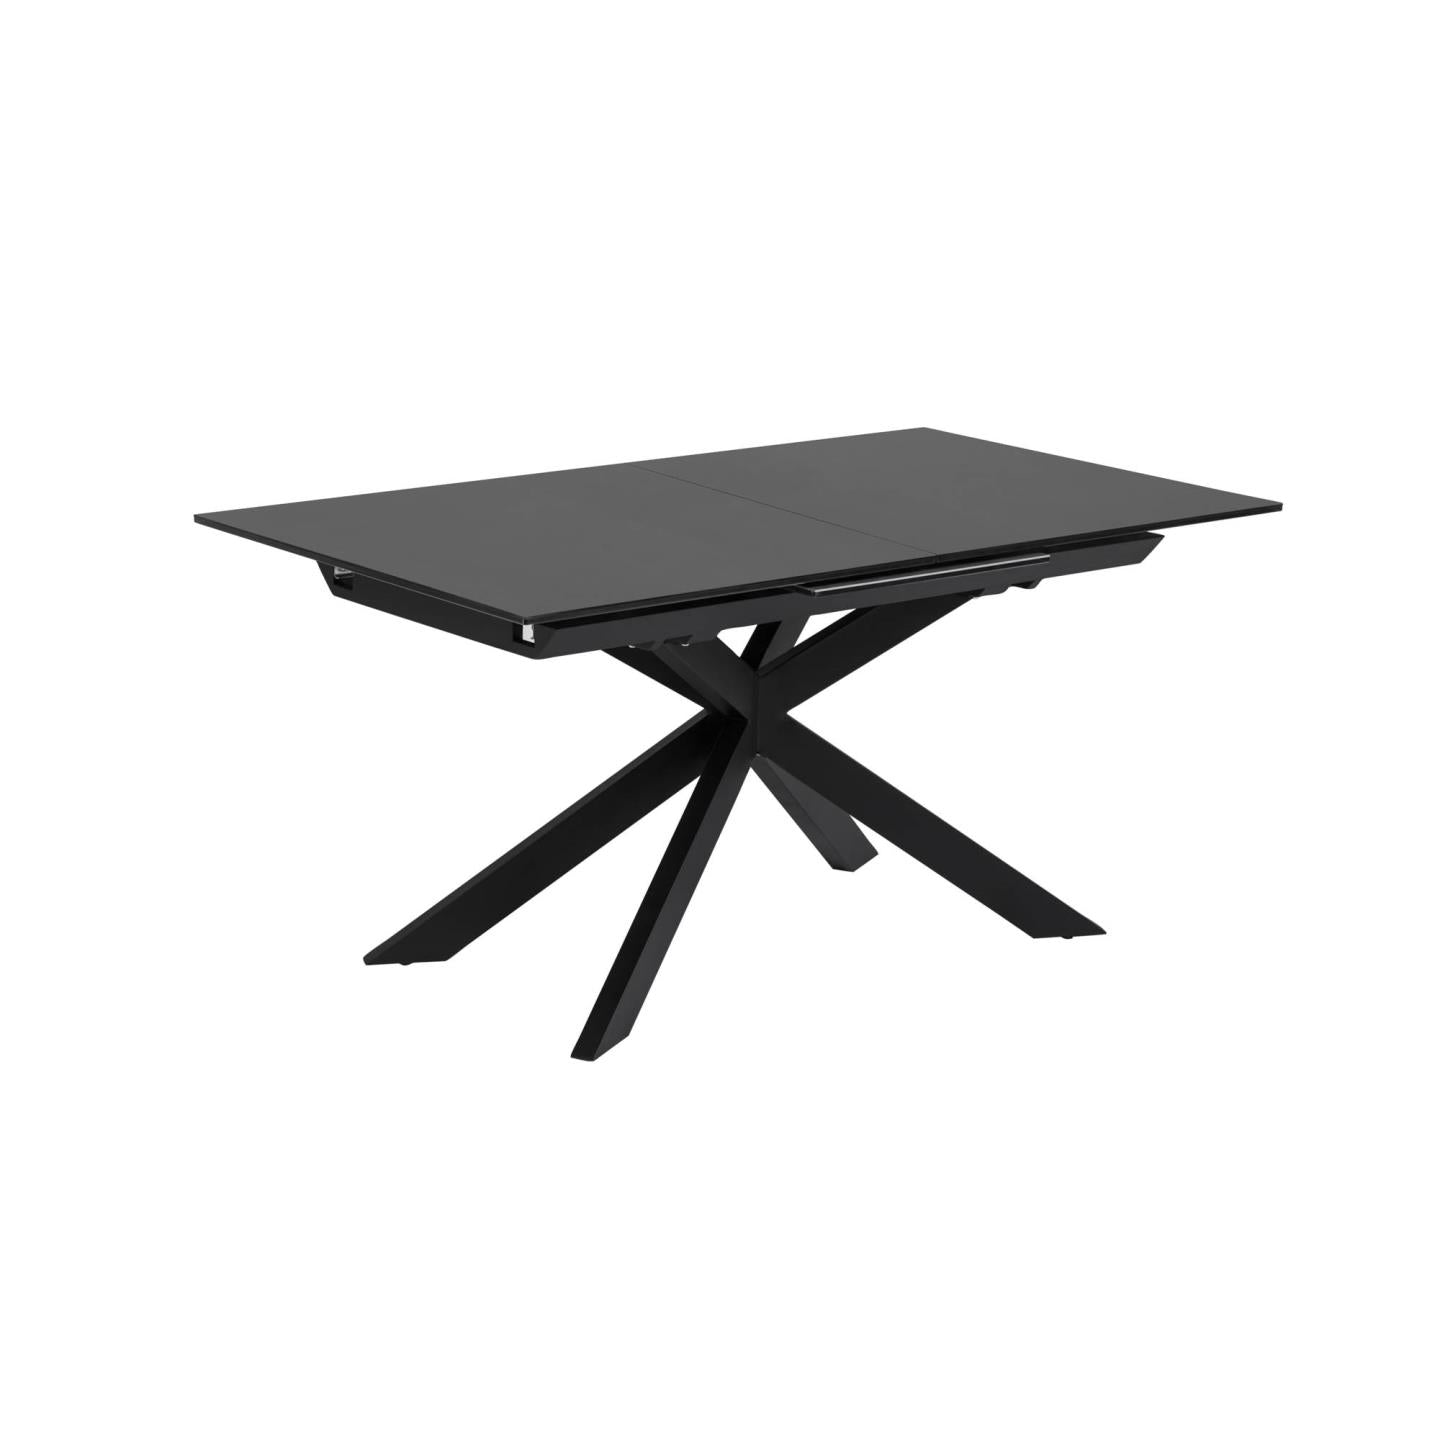 Atminda extendable glass table with steel legs with black finish 160 (210) x 90 cm